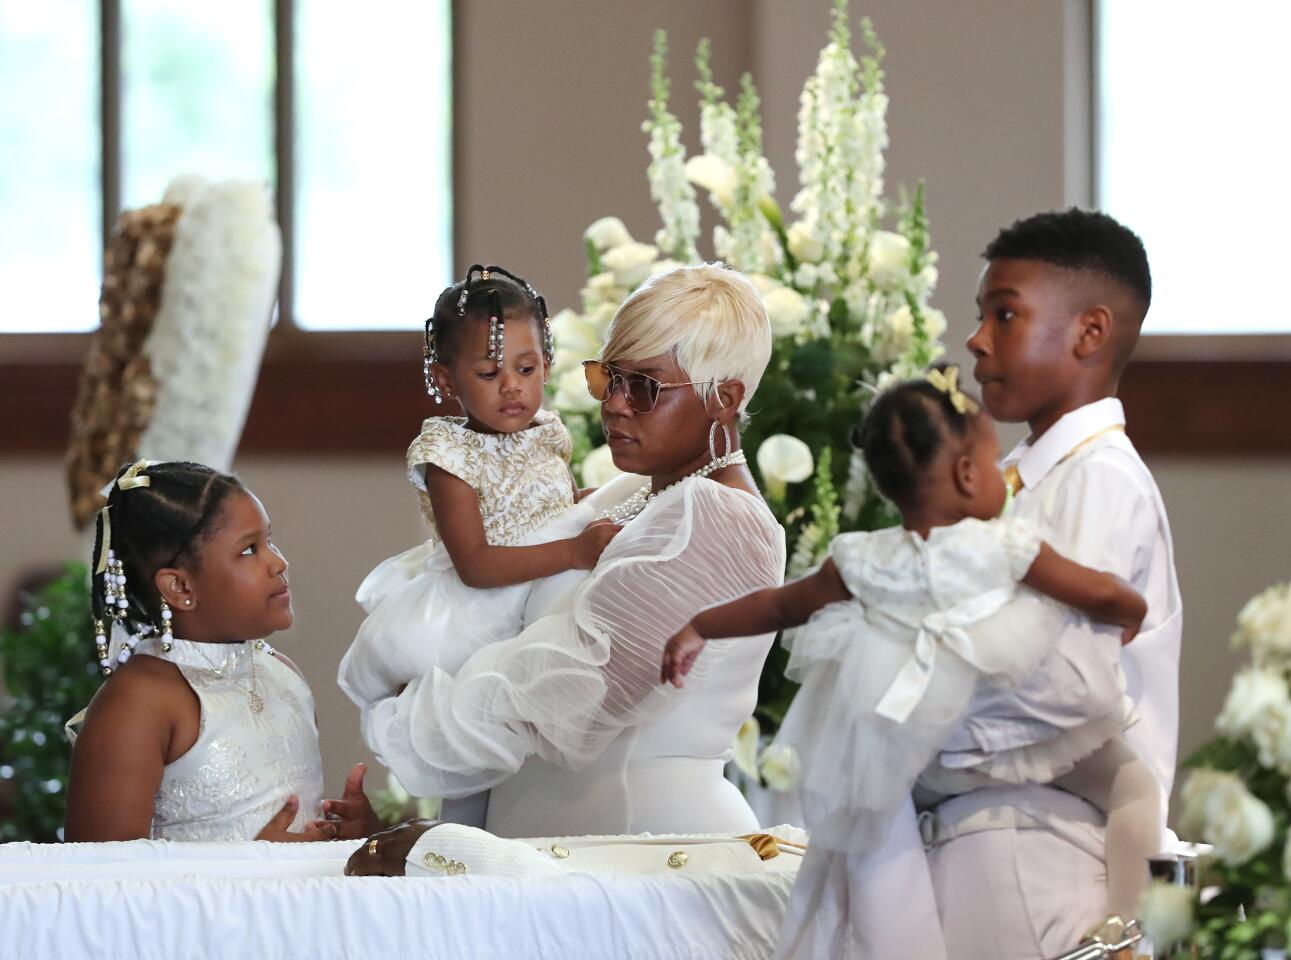 ATLANTA, GEORGIA - JUNE 23: Tomika Miller, wife of Rayshard Brooks, holds their 2-year-old daughter Memory while pausing with her children during the family processional at his funeral in in Ebenezer Baptist Church on June 23, 2020 in Atlanta. Brooks, 27, died June 12 after being shot by an officer in a Wendy's parking lot, sparking protests in Atlanta and around the country. The Rev. Raphael G. Warnock, senior pastor of Ebenezer, said "Rayshard Brooks wasn't just running from the police. He was running from a system that makes slaves out of people. A system that doesn't give ordinary people who've made mistakes a second chance, a real shot at redemption" (Photo by Curtis Compton-Pool/Getty Images)